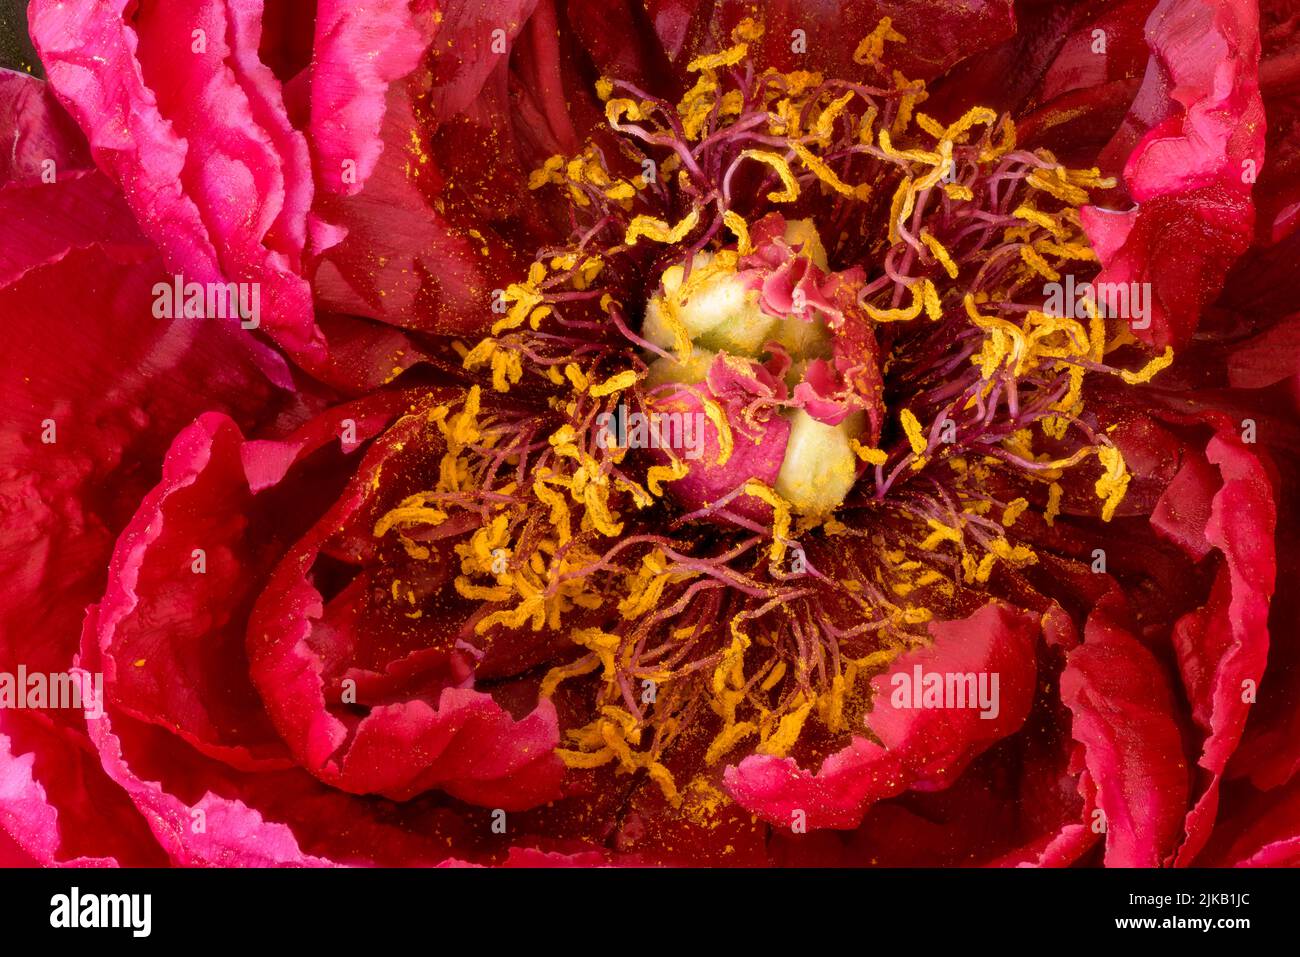 Vibrant red peony blossom heart top view macro in vintage painting style Stock Photo